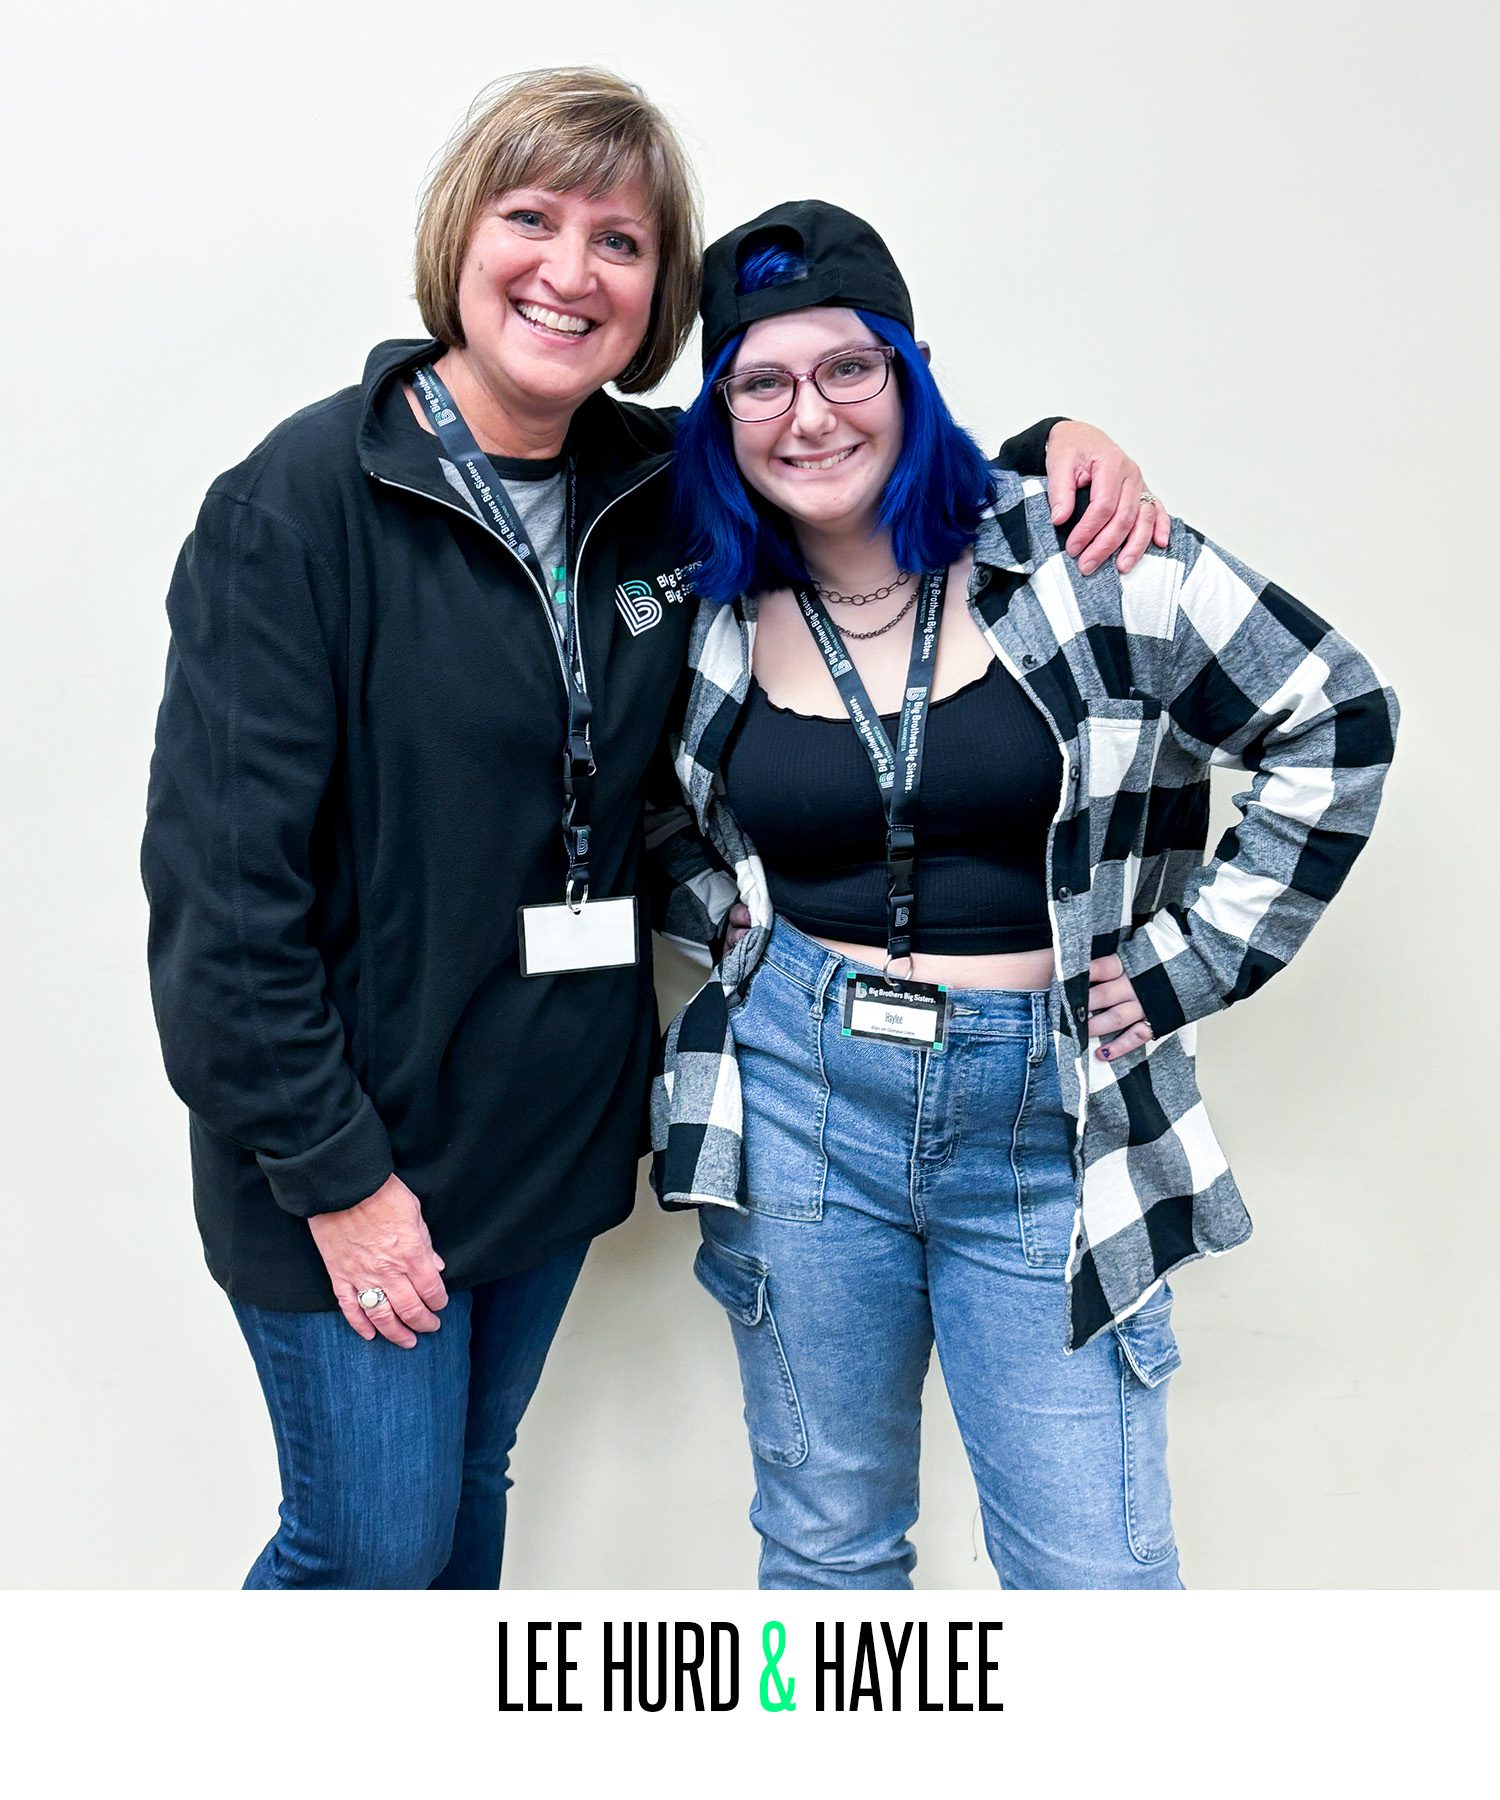 Lee Hurd and Haylee pose for a picture after being matched